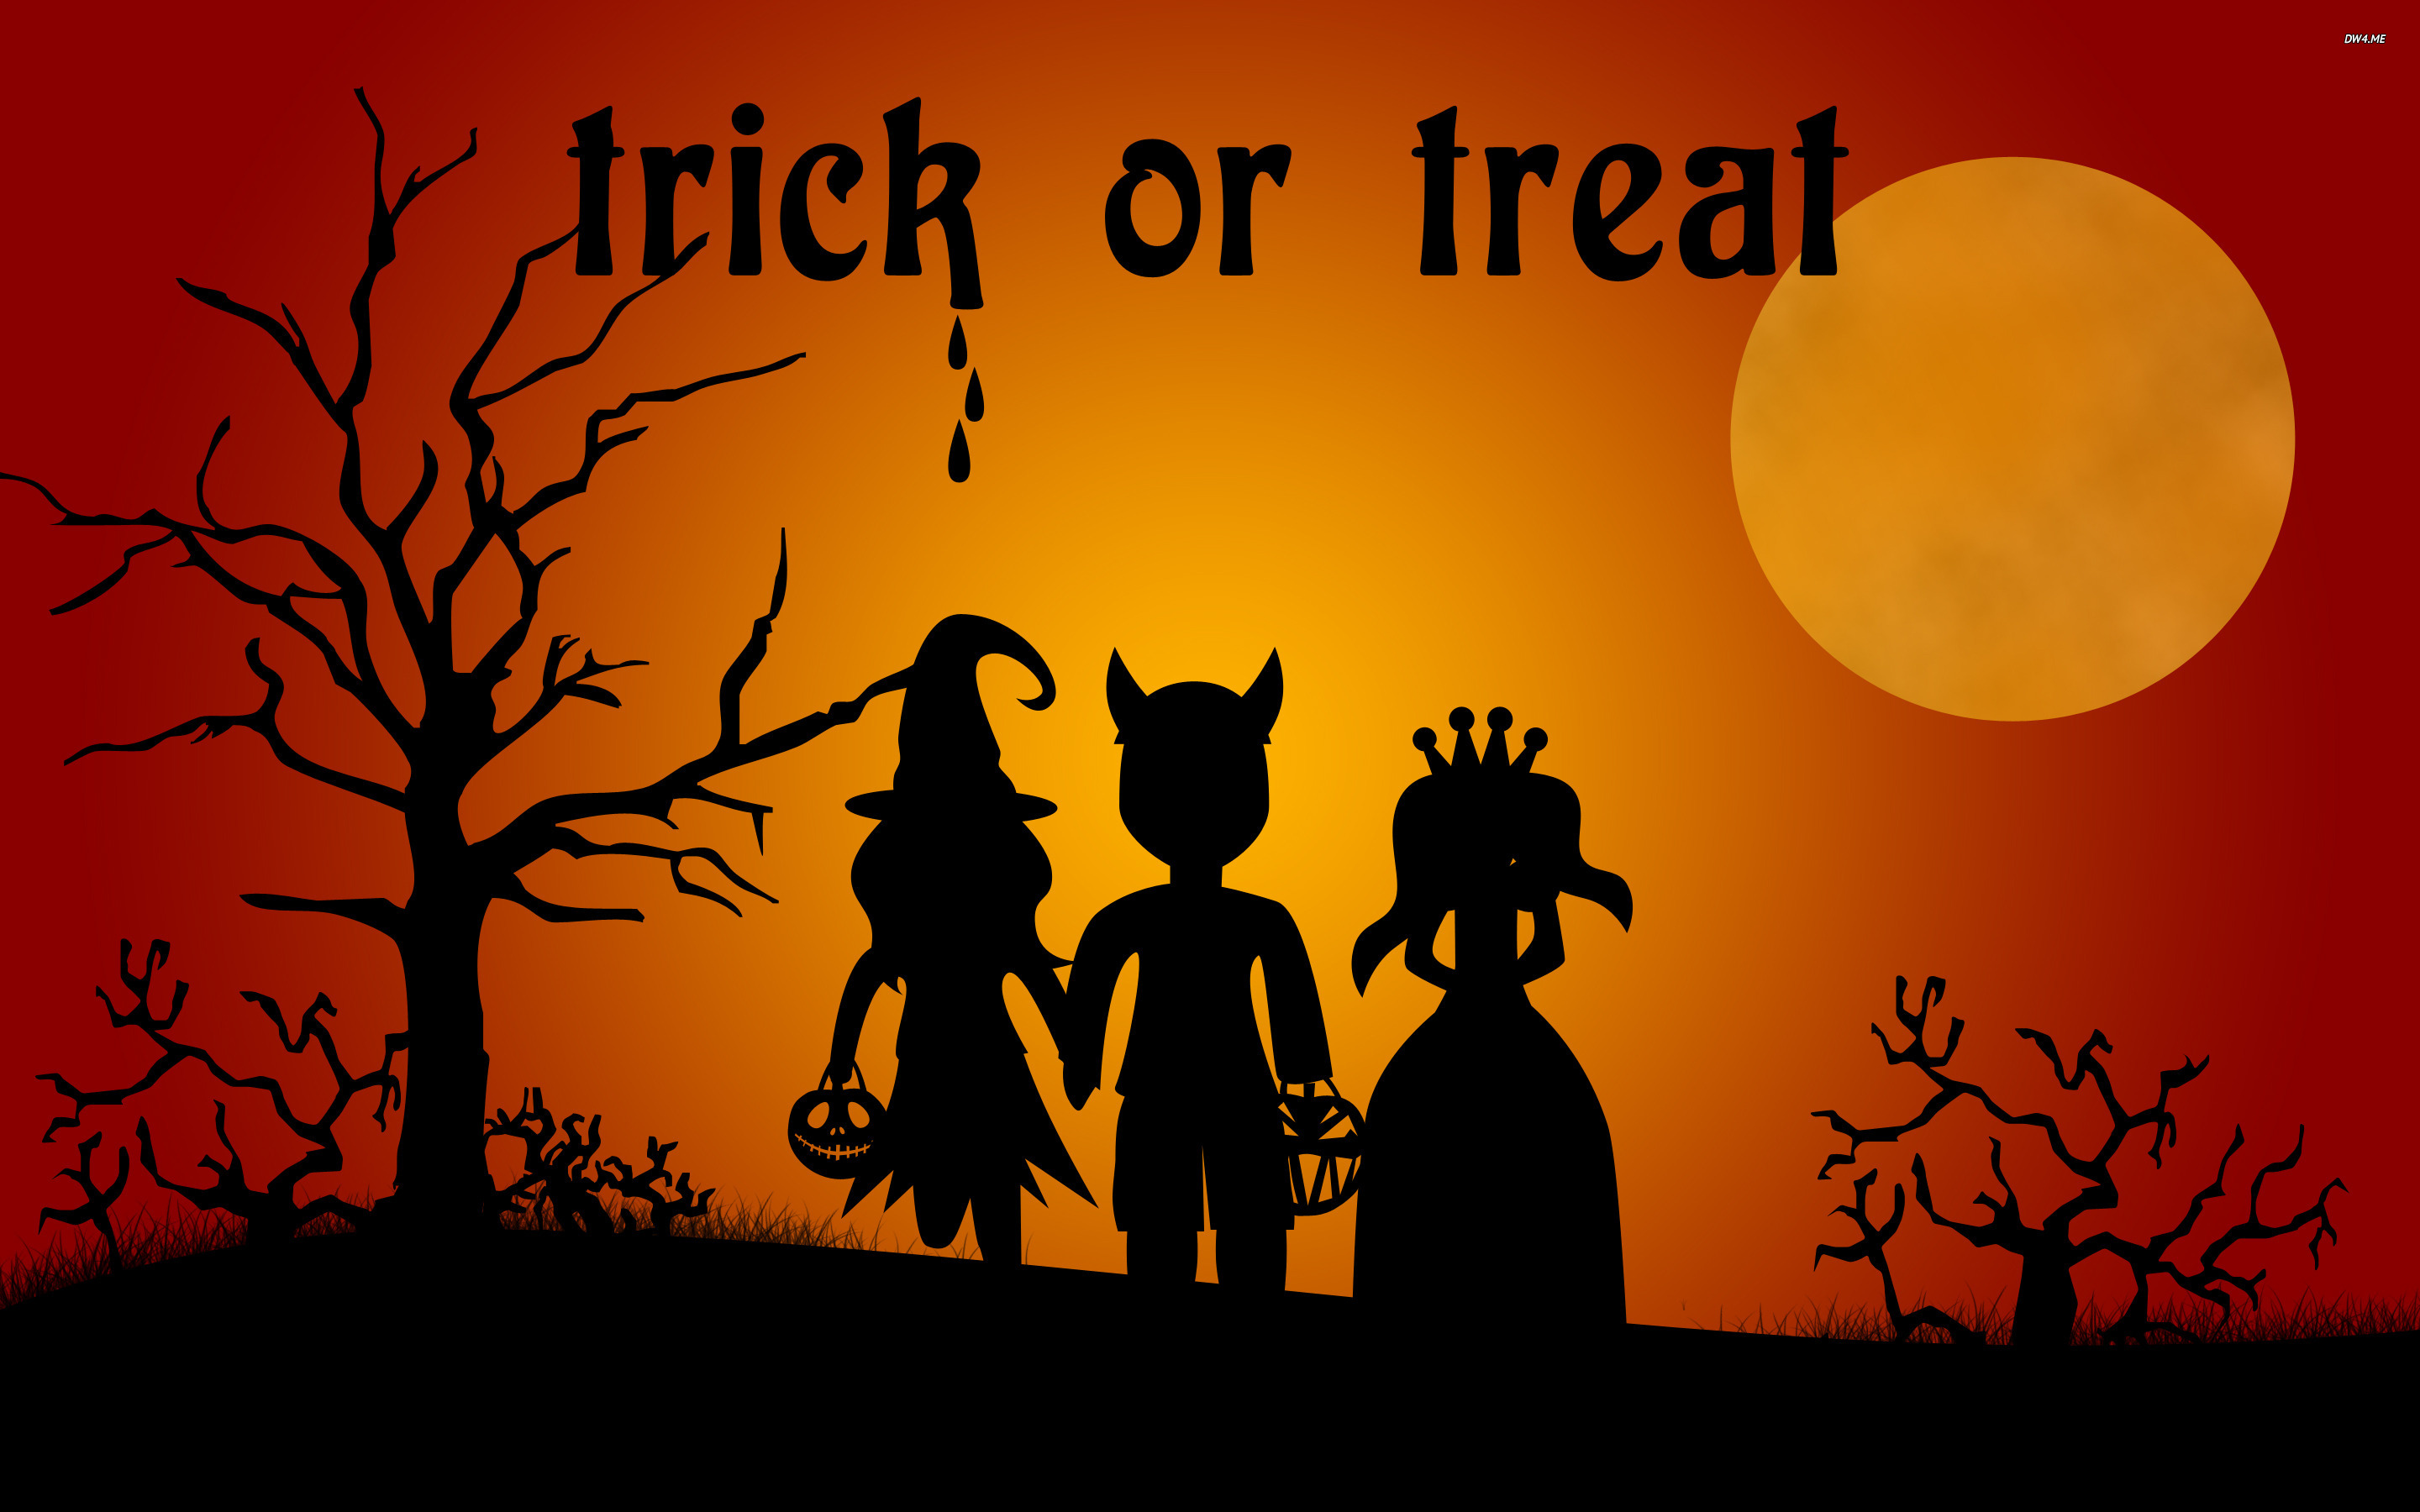 Trick or treat wallpaper - Holiday wallpapers - #1759 - Images ...